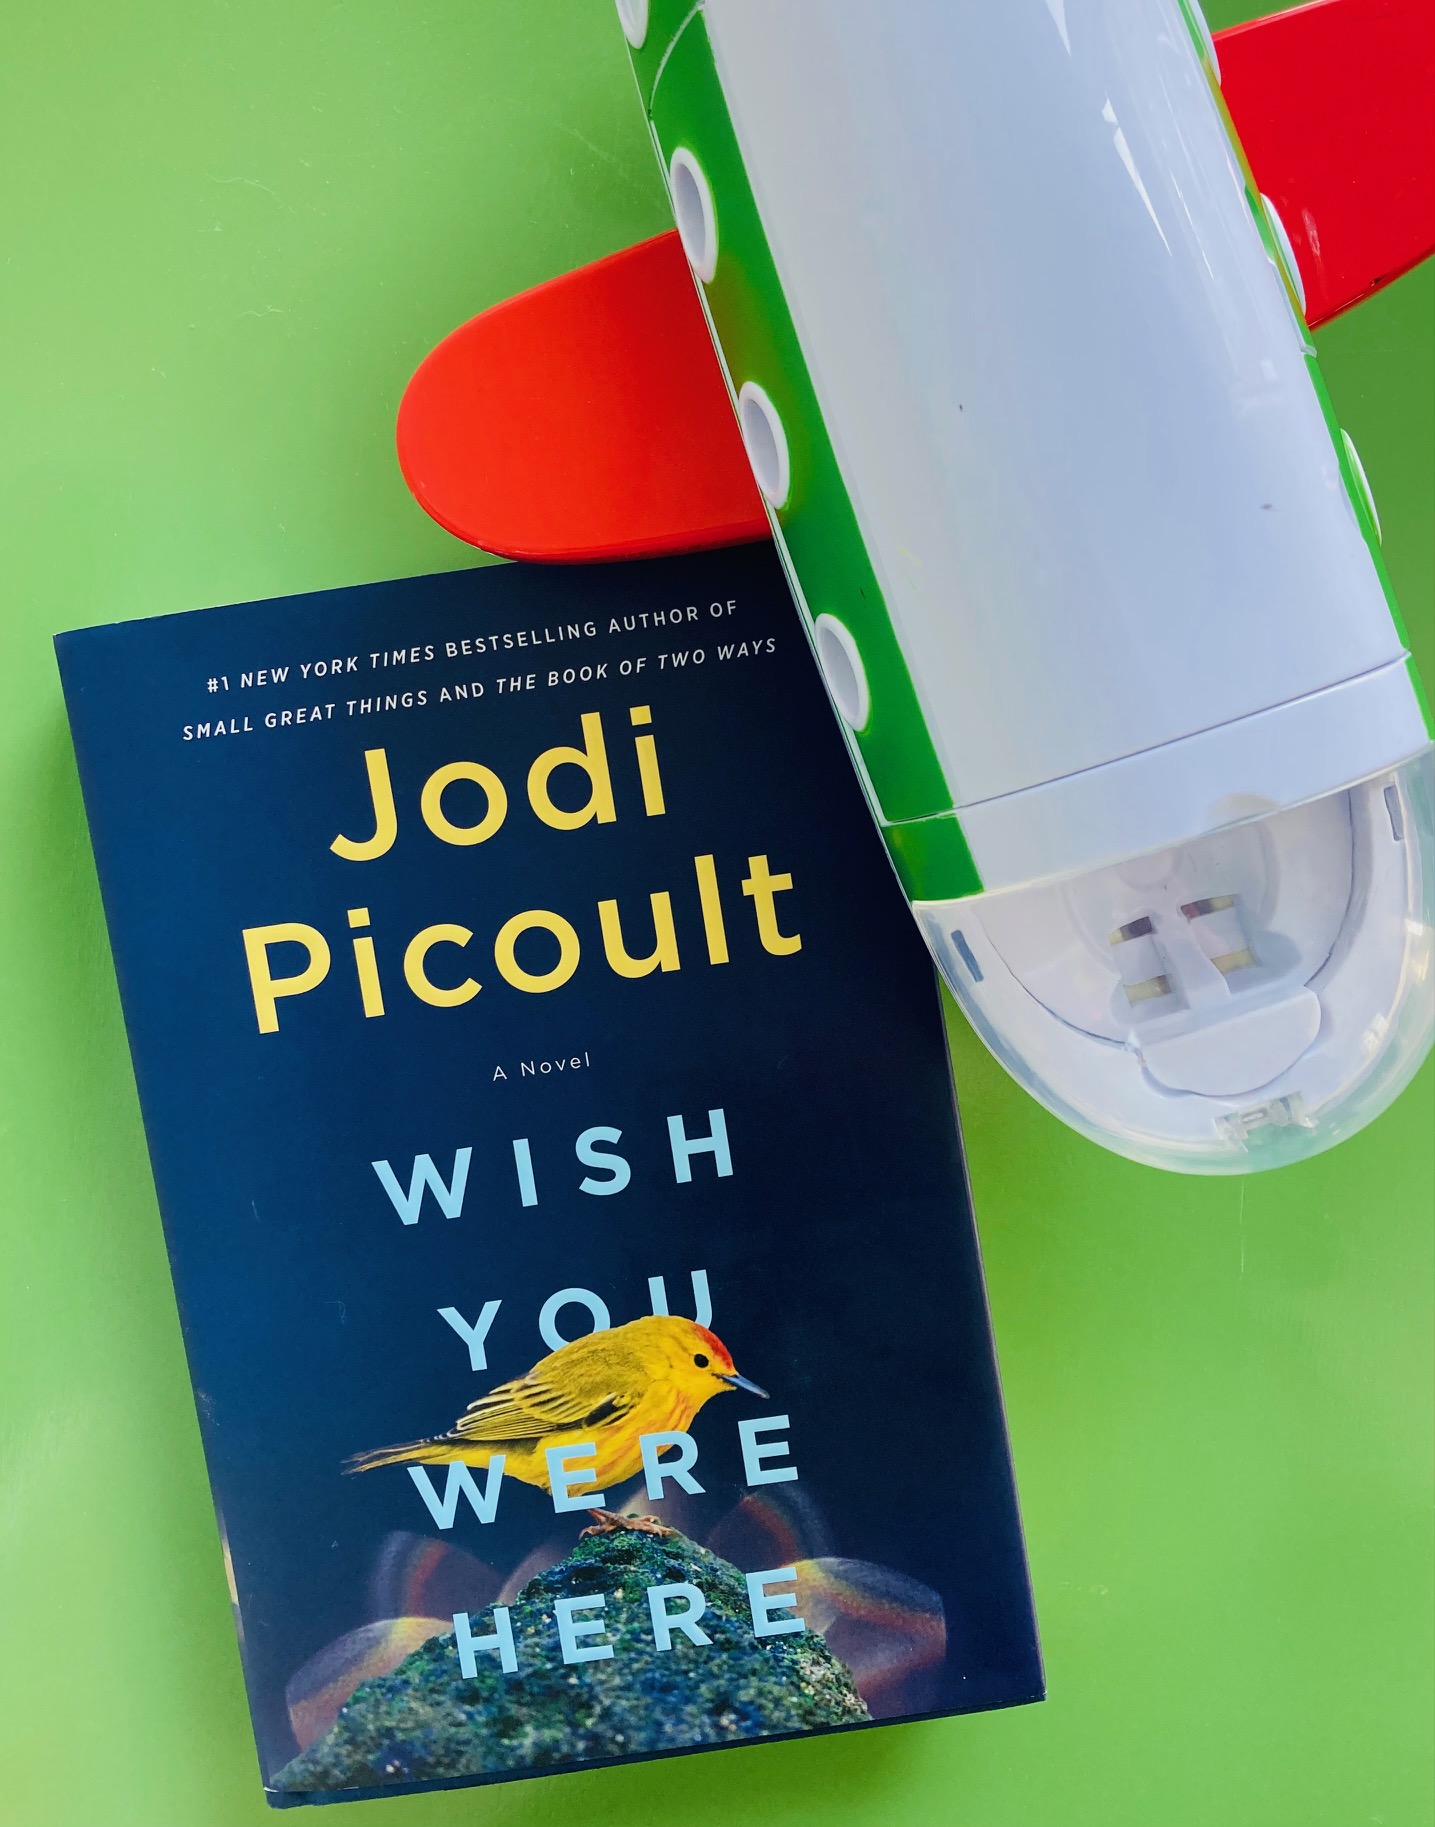 picture of Wish You Were Here by Jodi Picoult book, on a green background with a toy airplane beside it